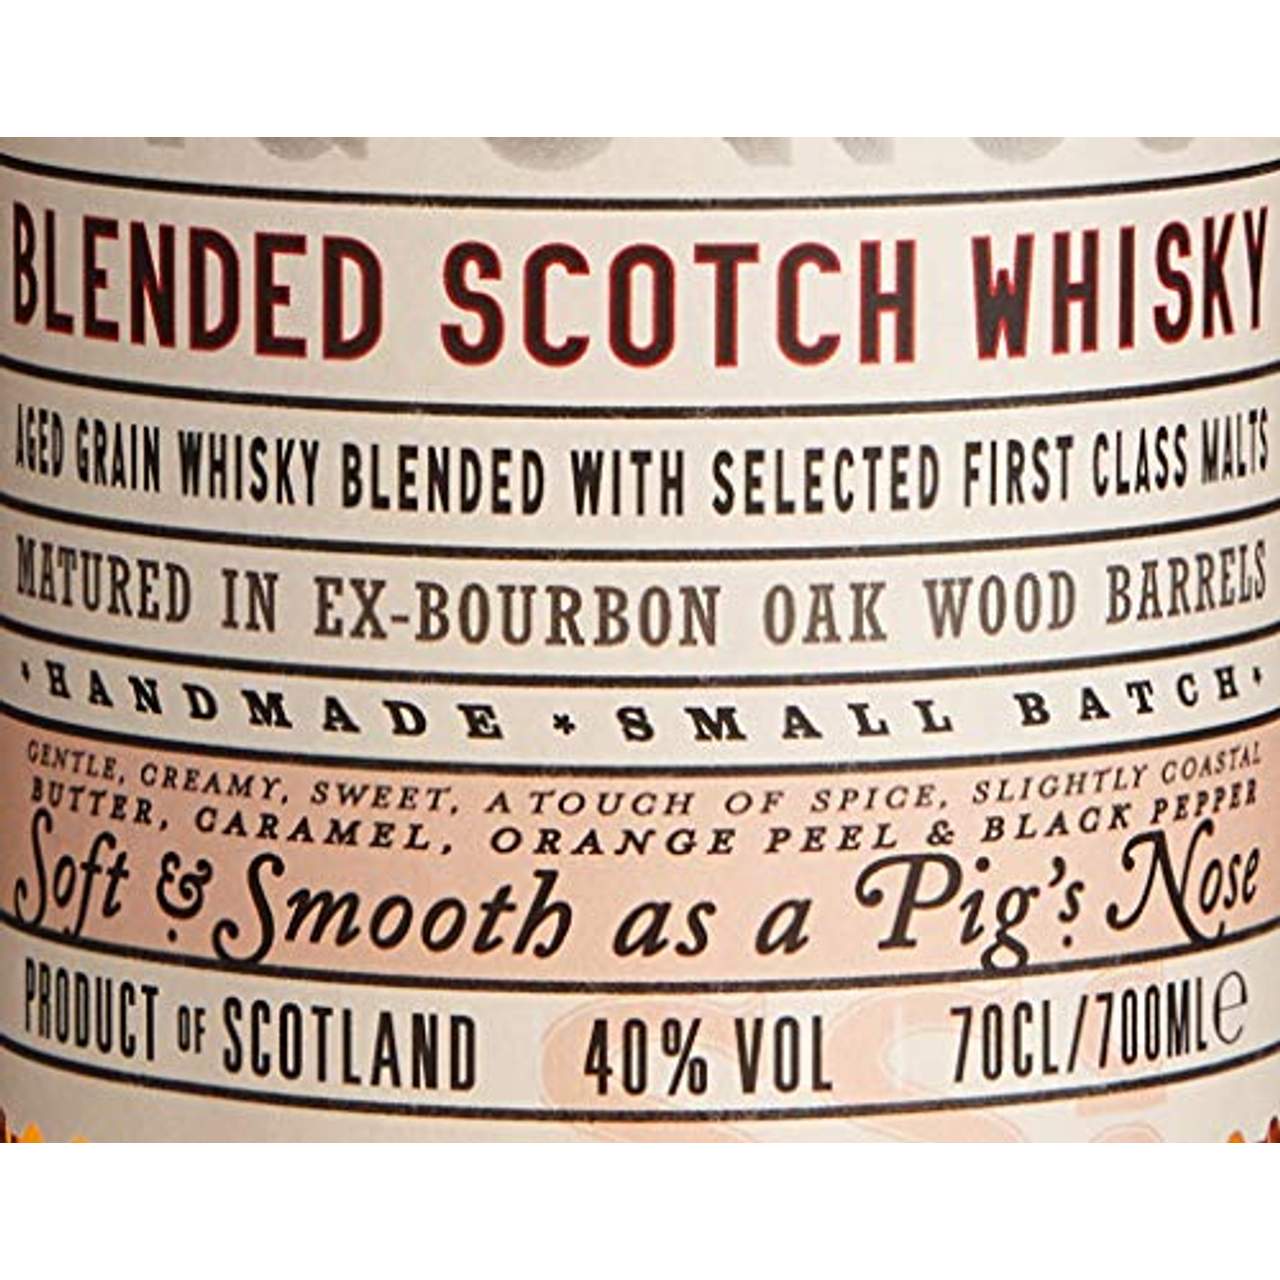 Pig's Nose 5 Jahre Blended Scotch Whisky